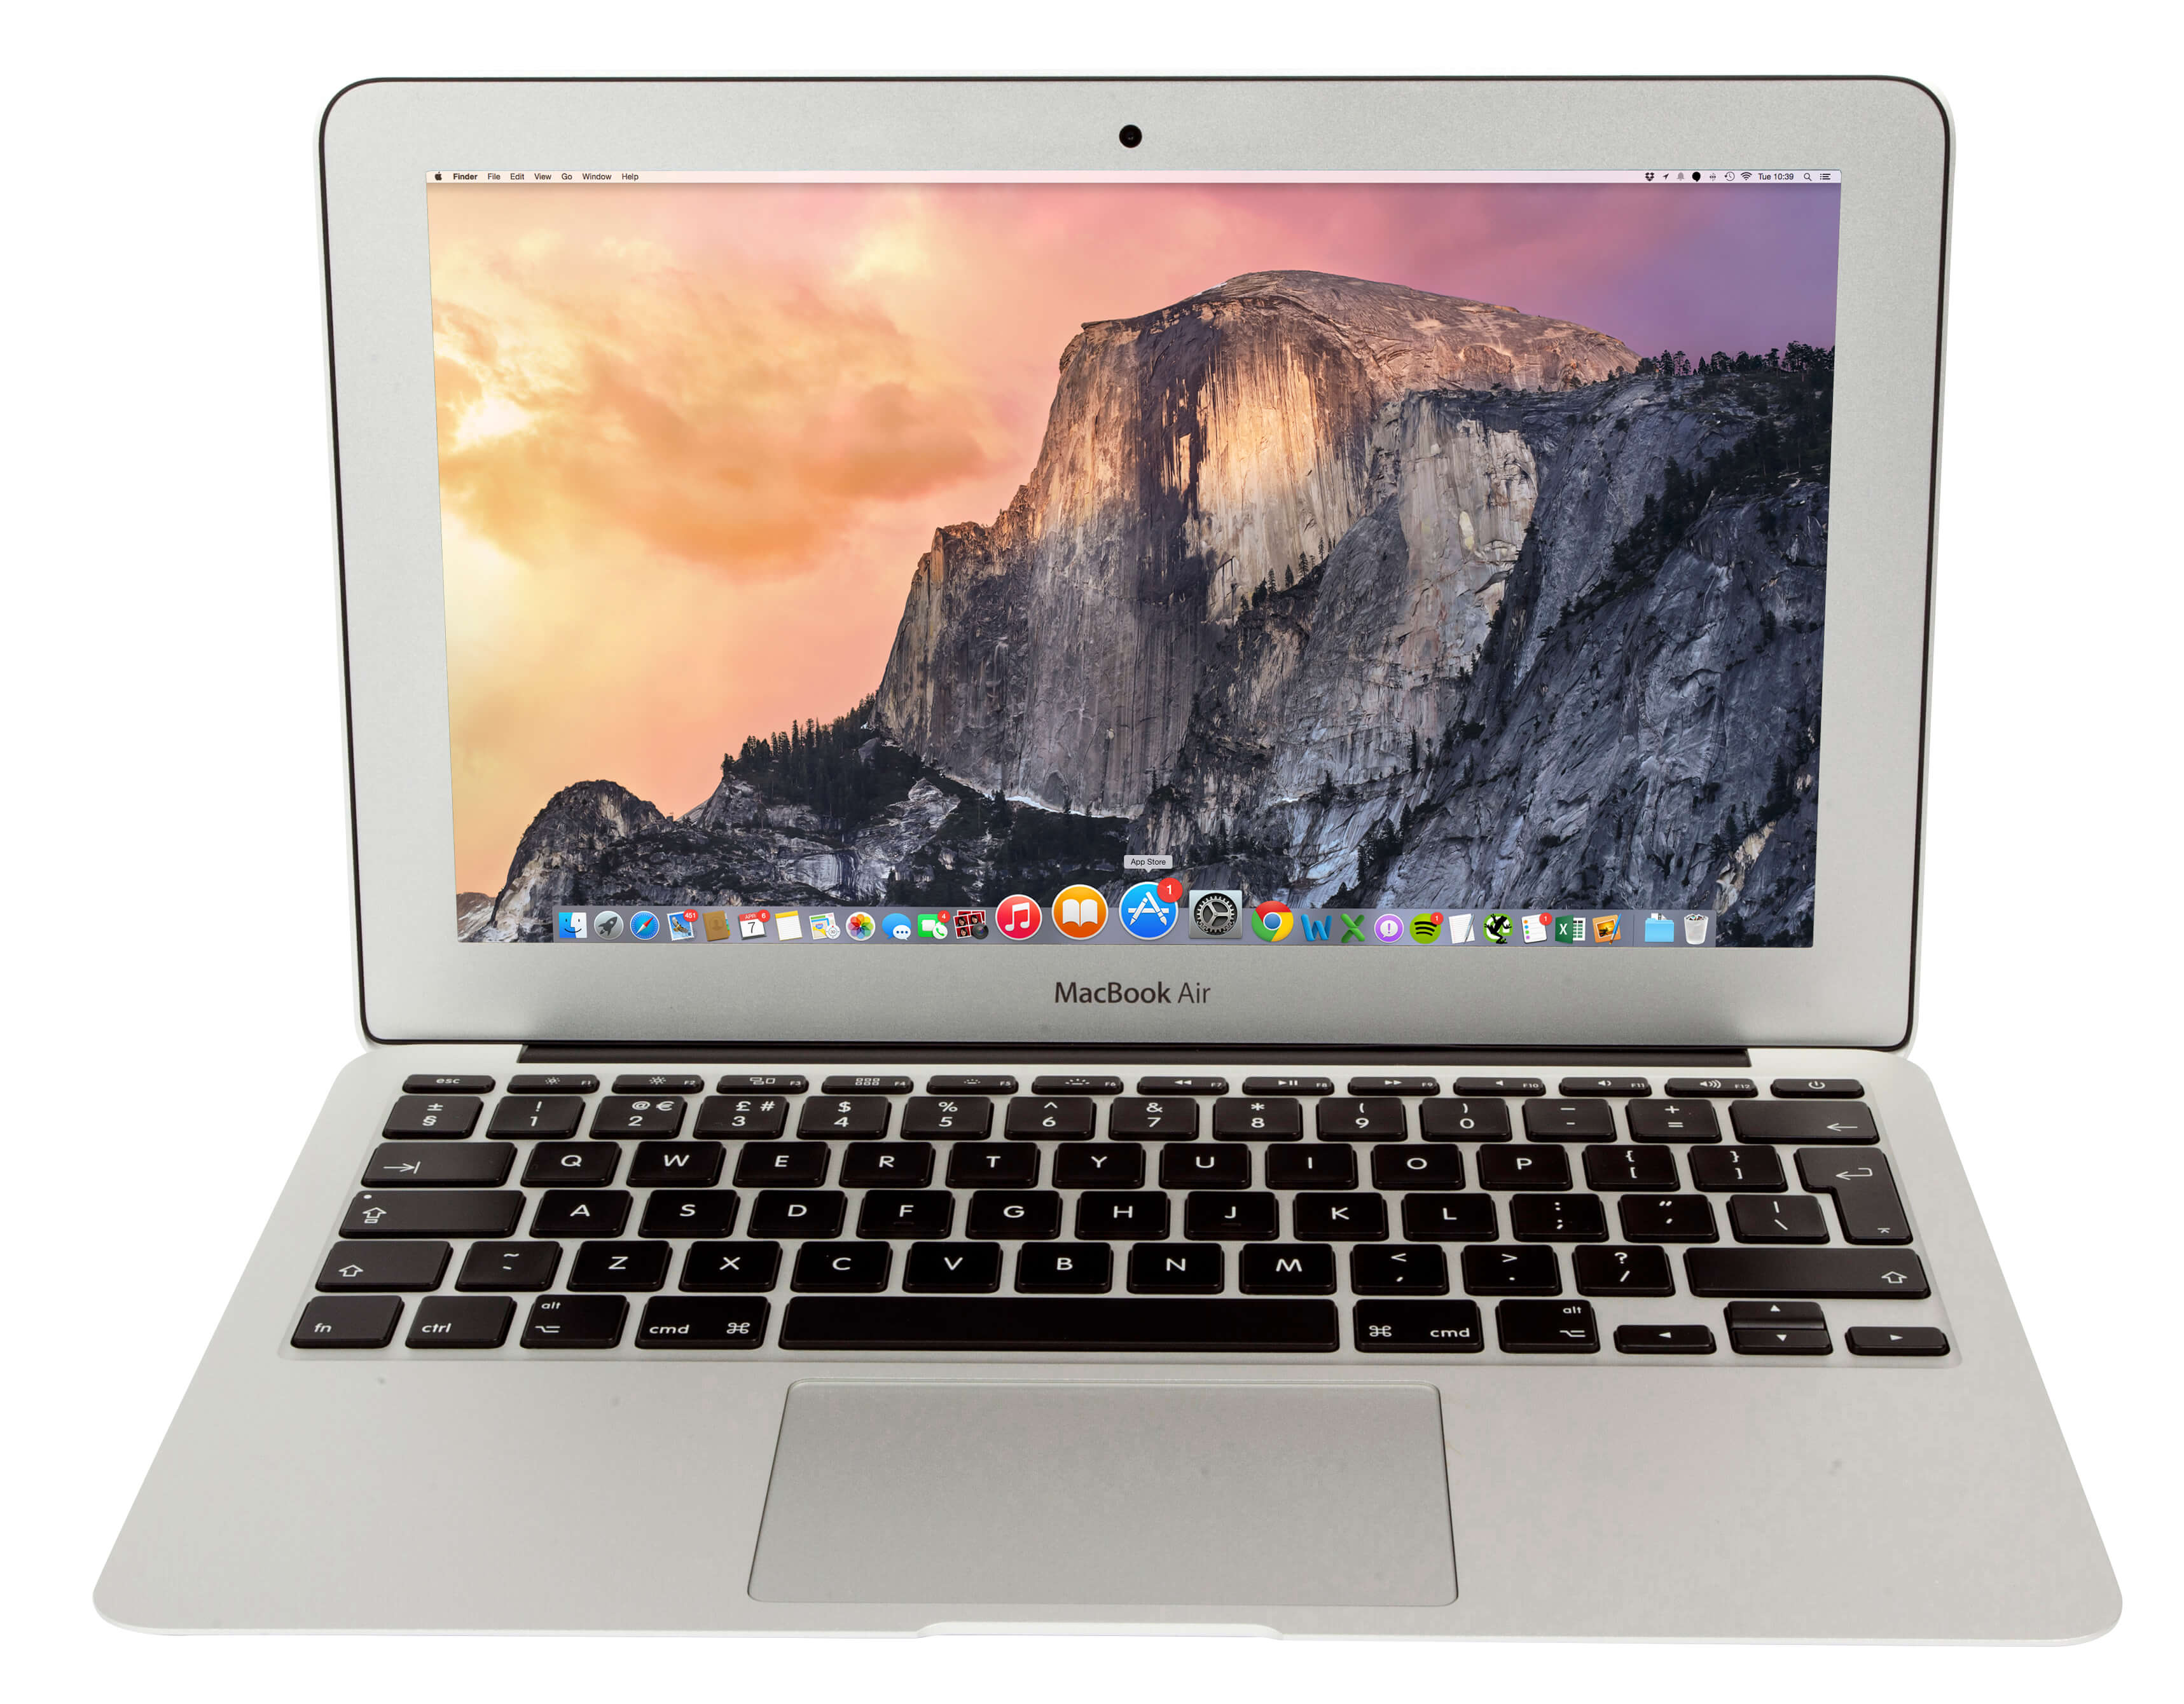 Refreshed MacBook Air Looks to be Delayed Until Later This Year